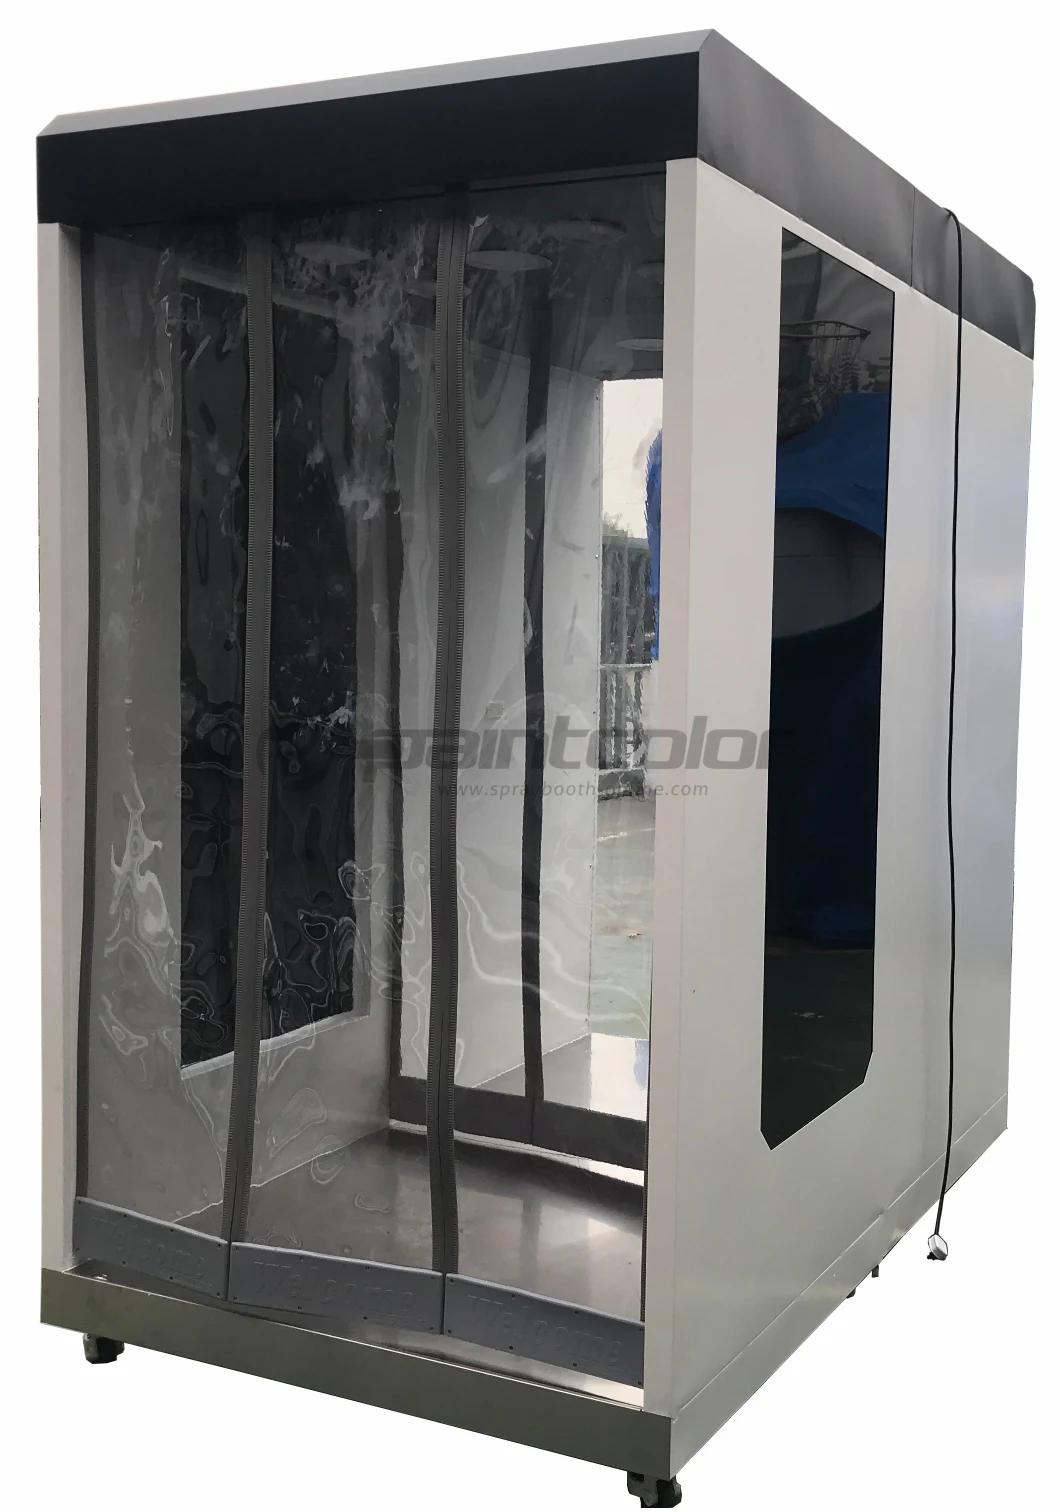 Intelligent Detection Spray Disinfection Cabinet No Contact Fast Channel